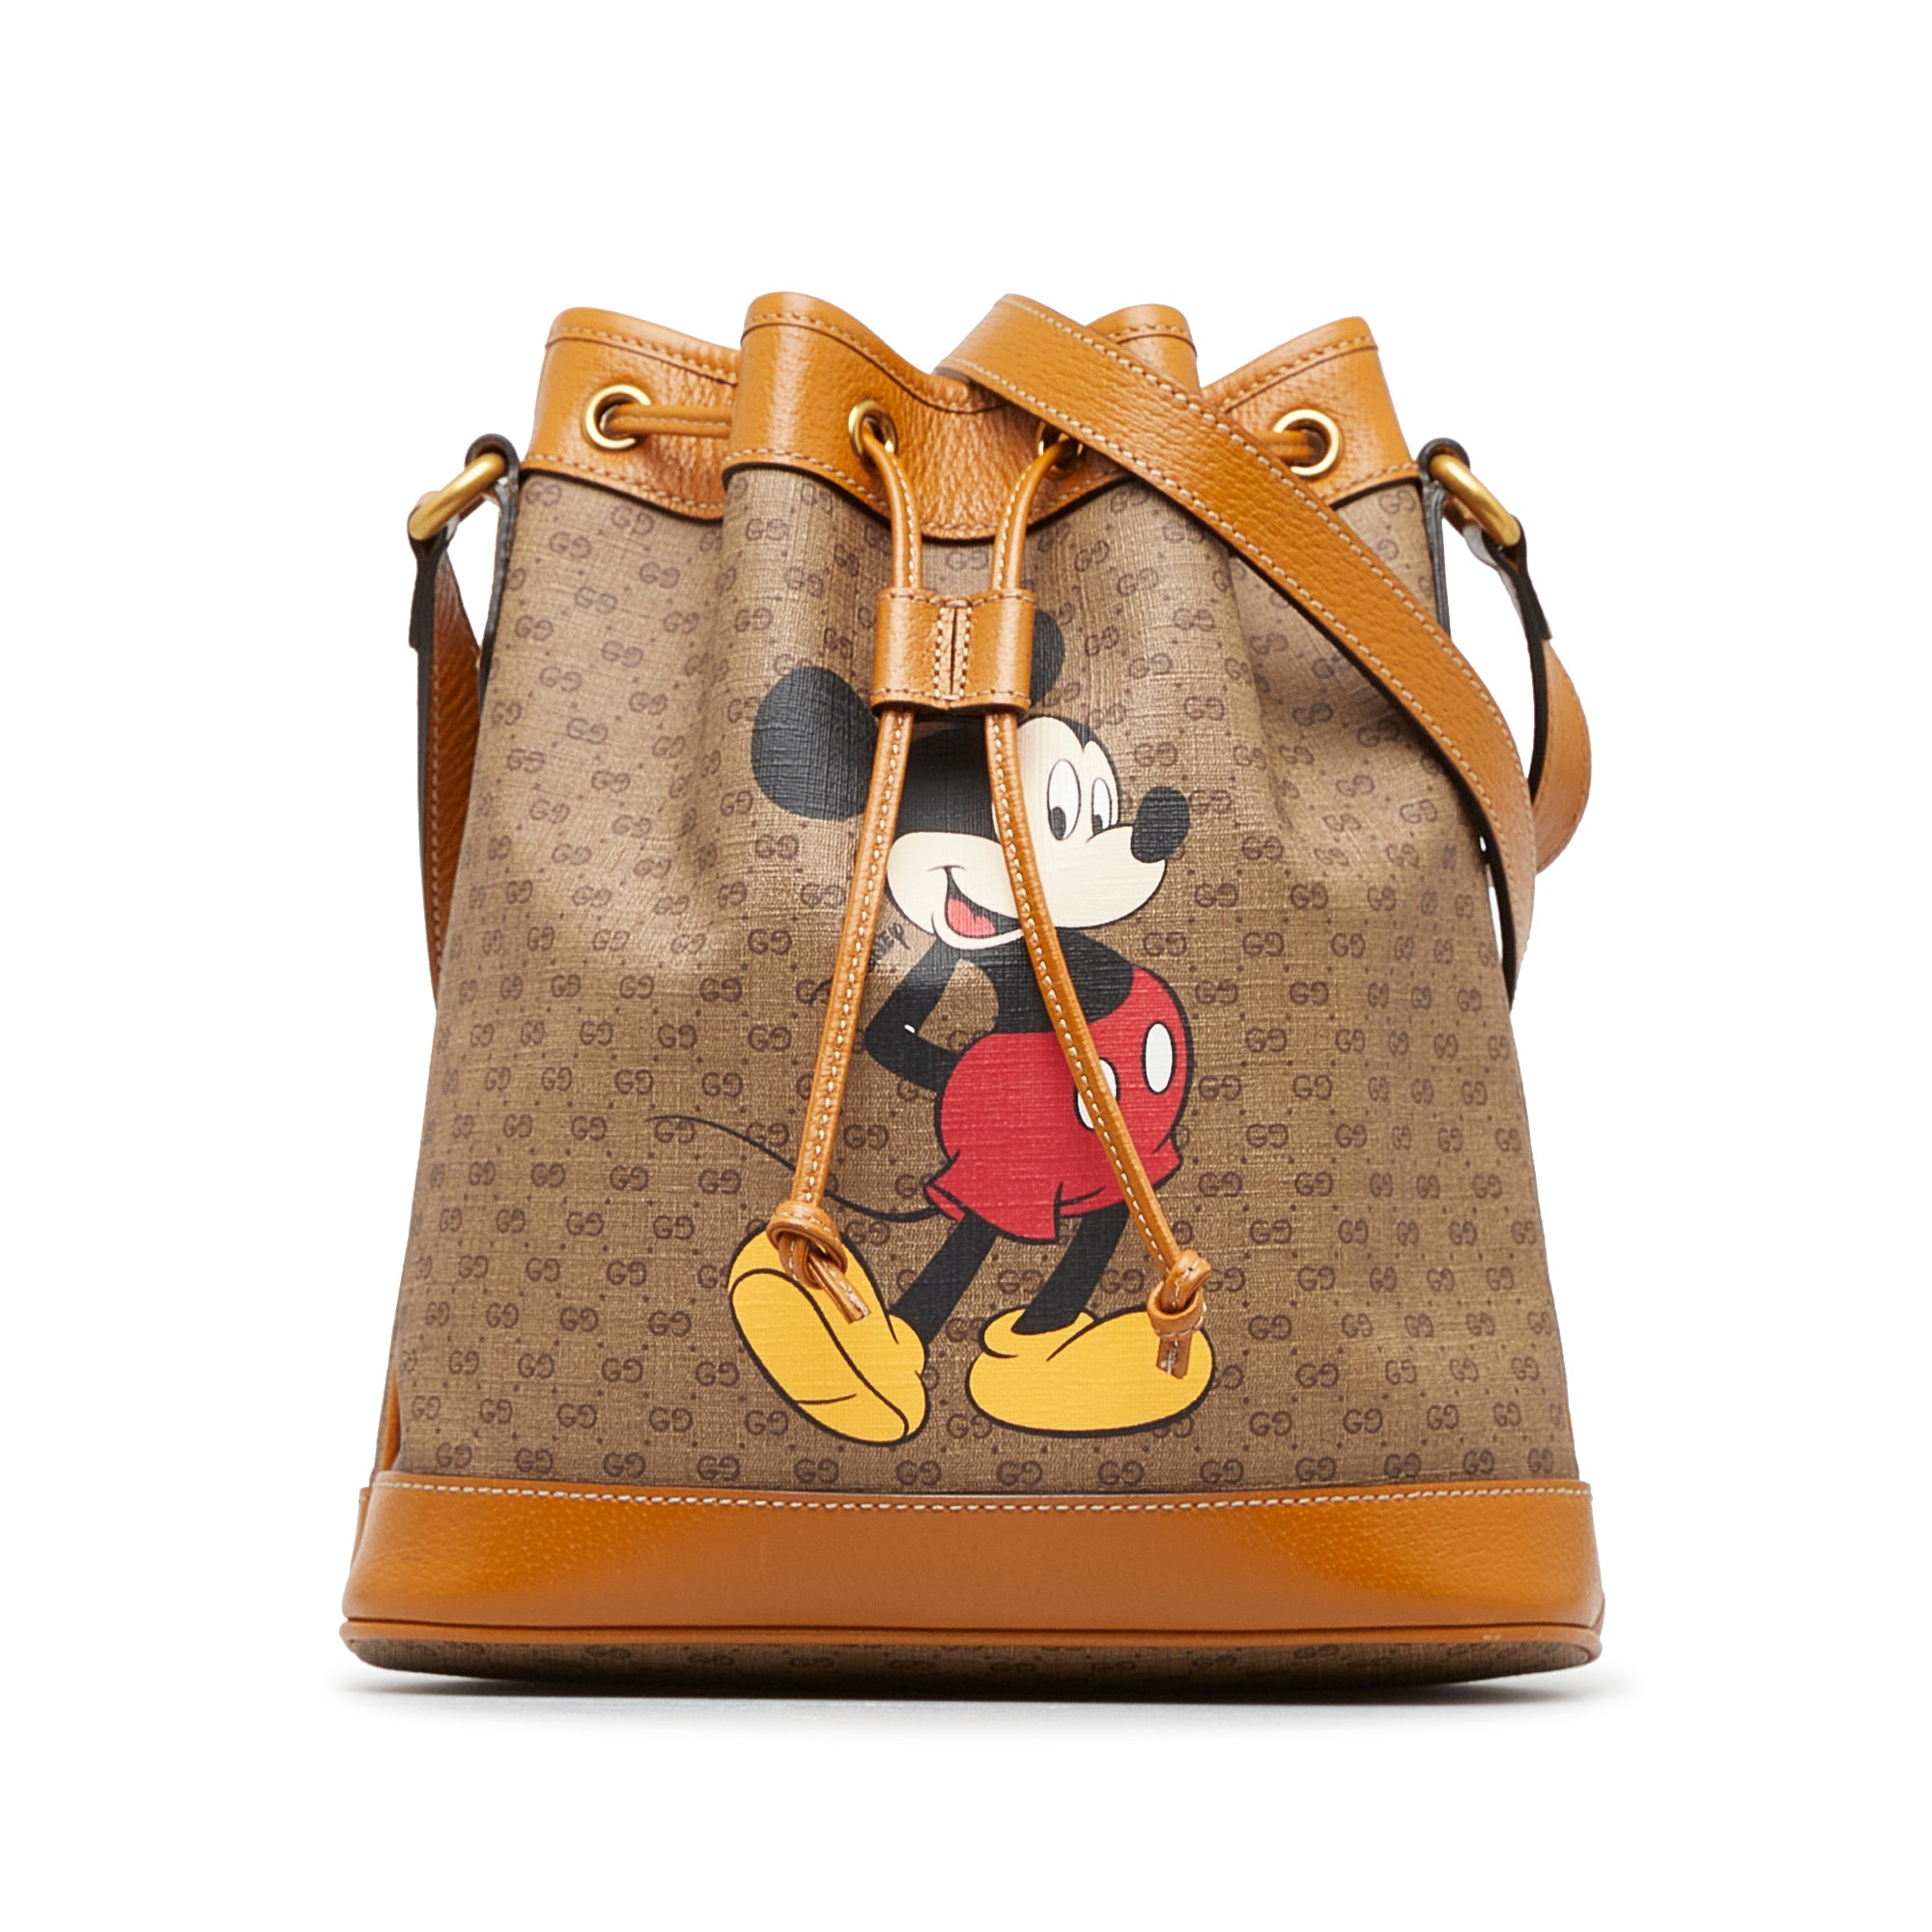 Gucci Disney Mickey Mouse Shoulder Bag Printed Mini GG Coated